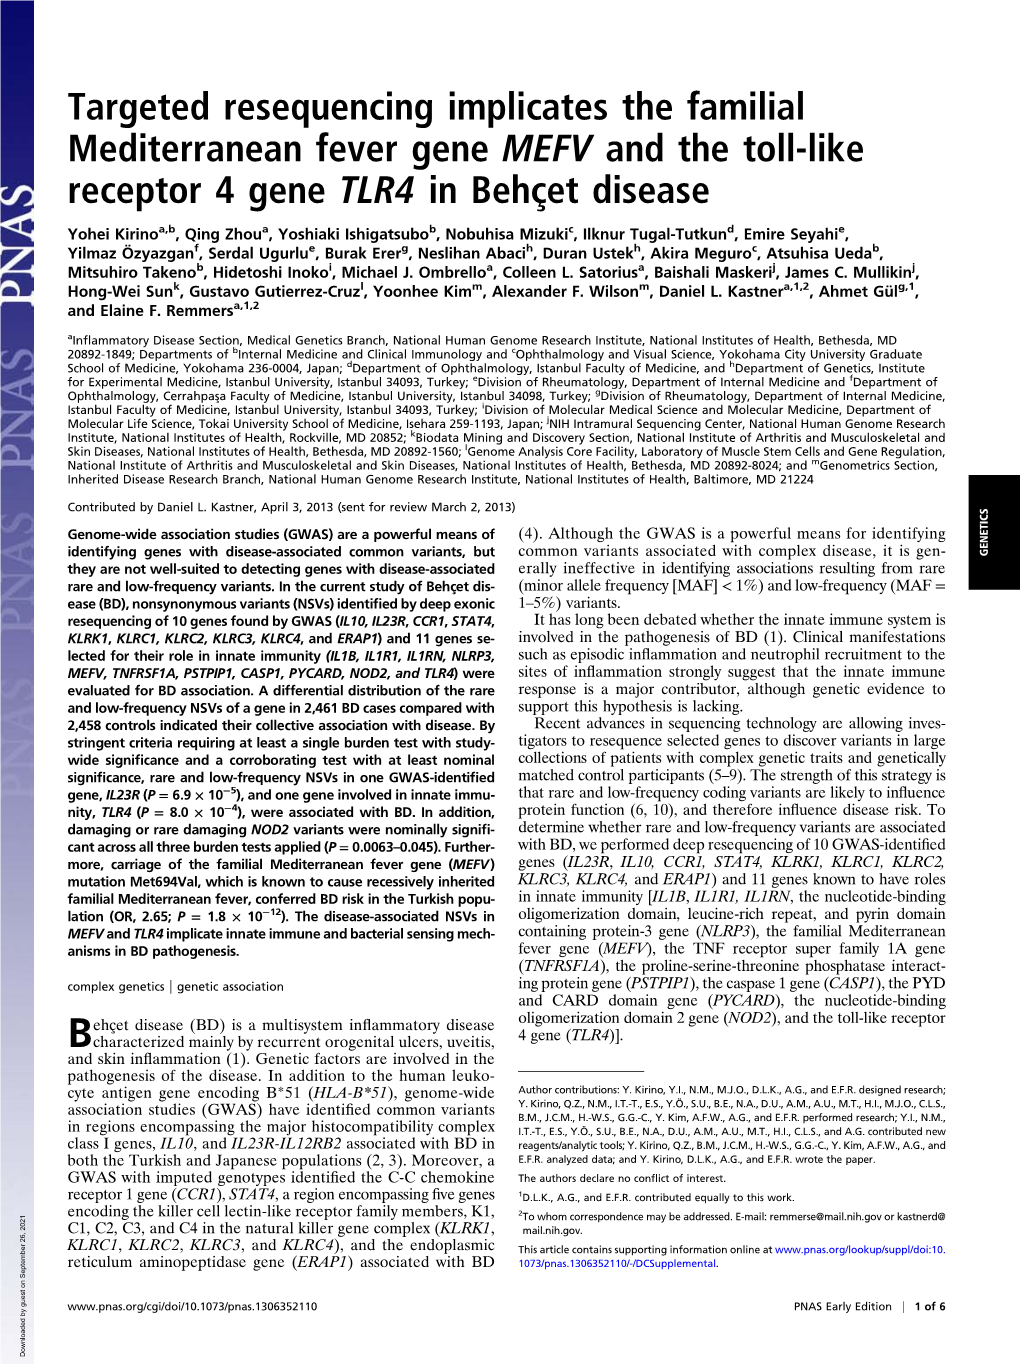 Targeted Resequencing Implicates the Familial Mediterranean Fever Gene MEFV and the Toll-Like Receptor 4 Gene TLR4 in Behçet Disease